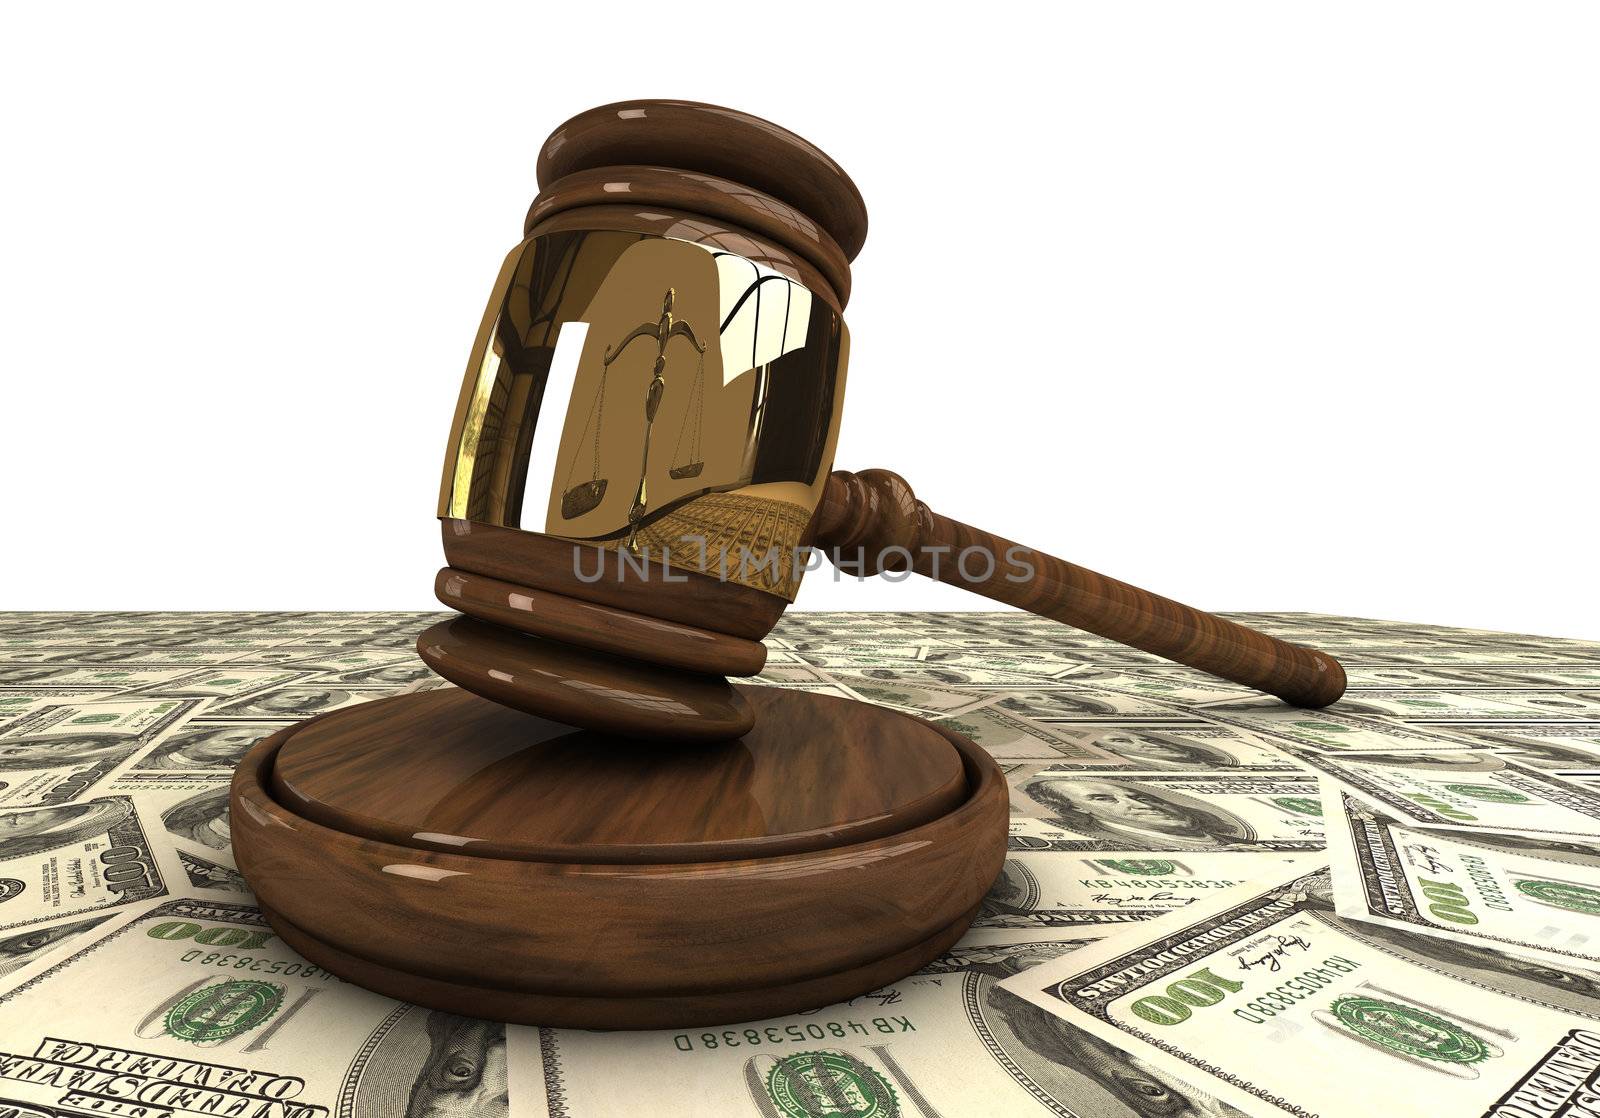 Judge's gavel standing on a dollars. Conceptual illustration